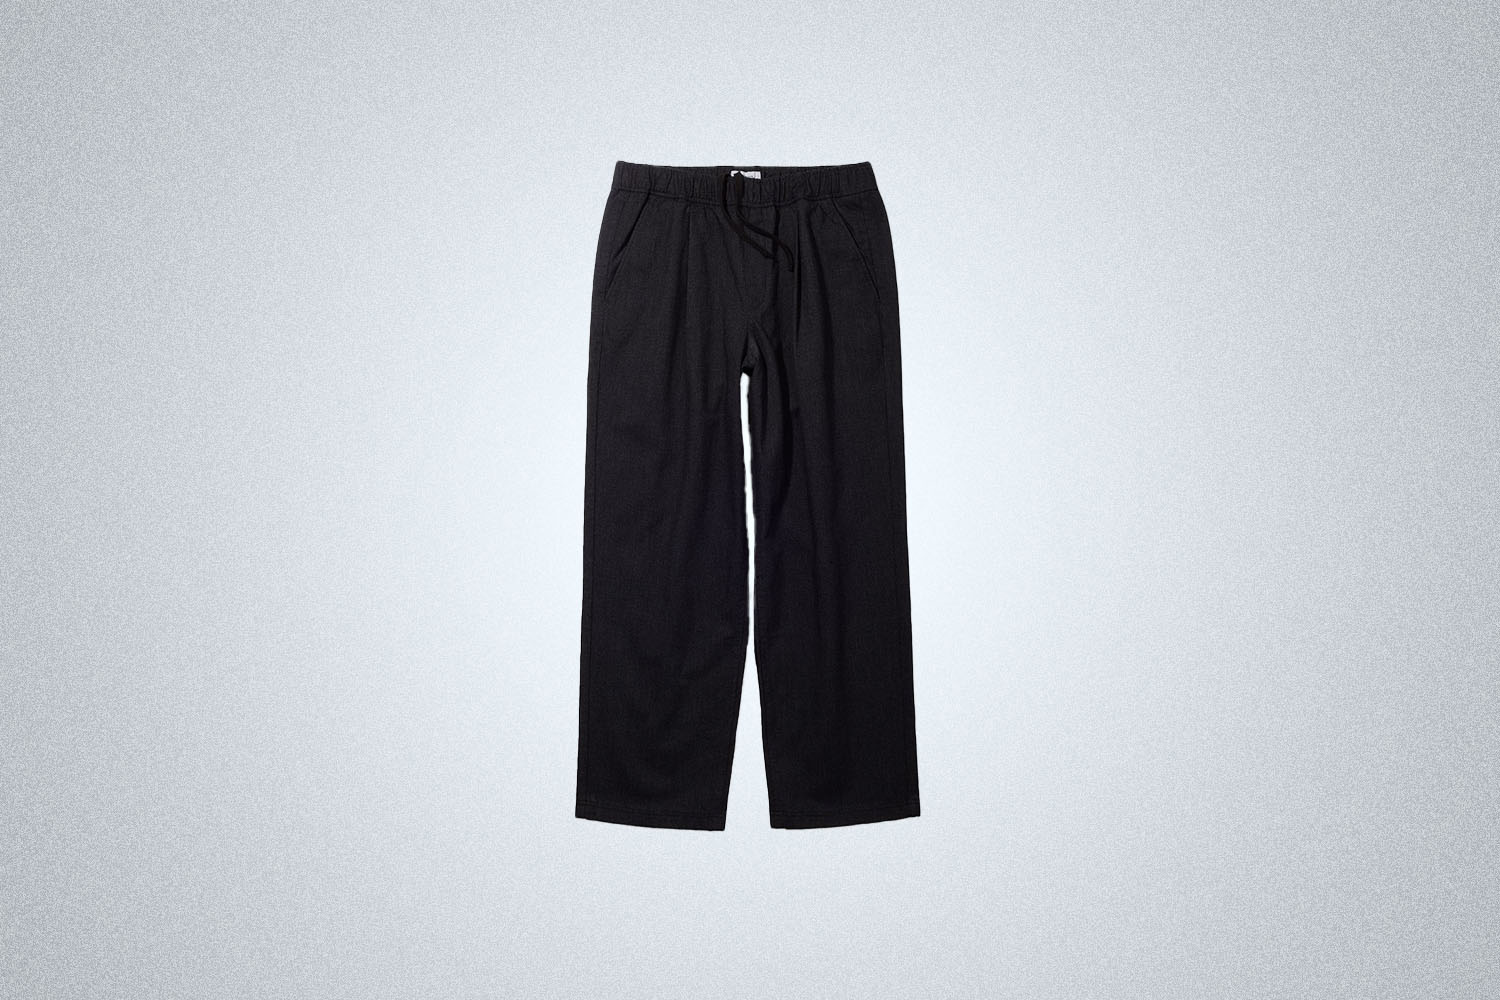 a pair of loose fitting pants 